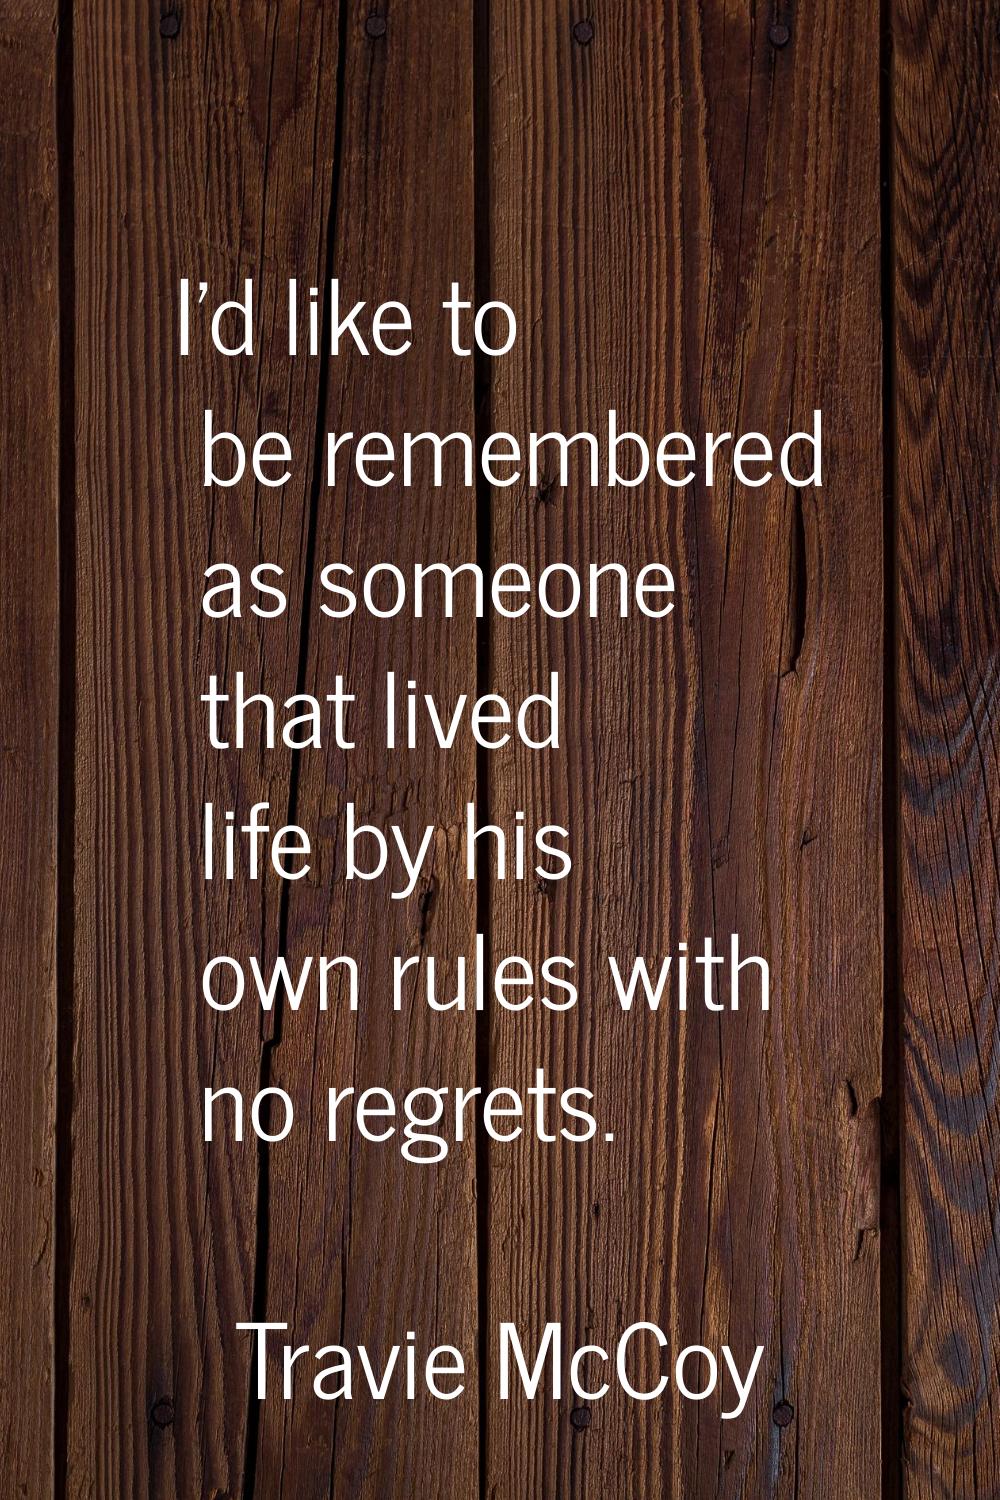 I'd like to be remembered as someone that lived life by his own rules with no regrets.